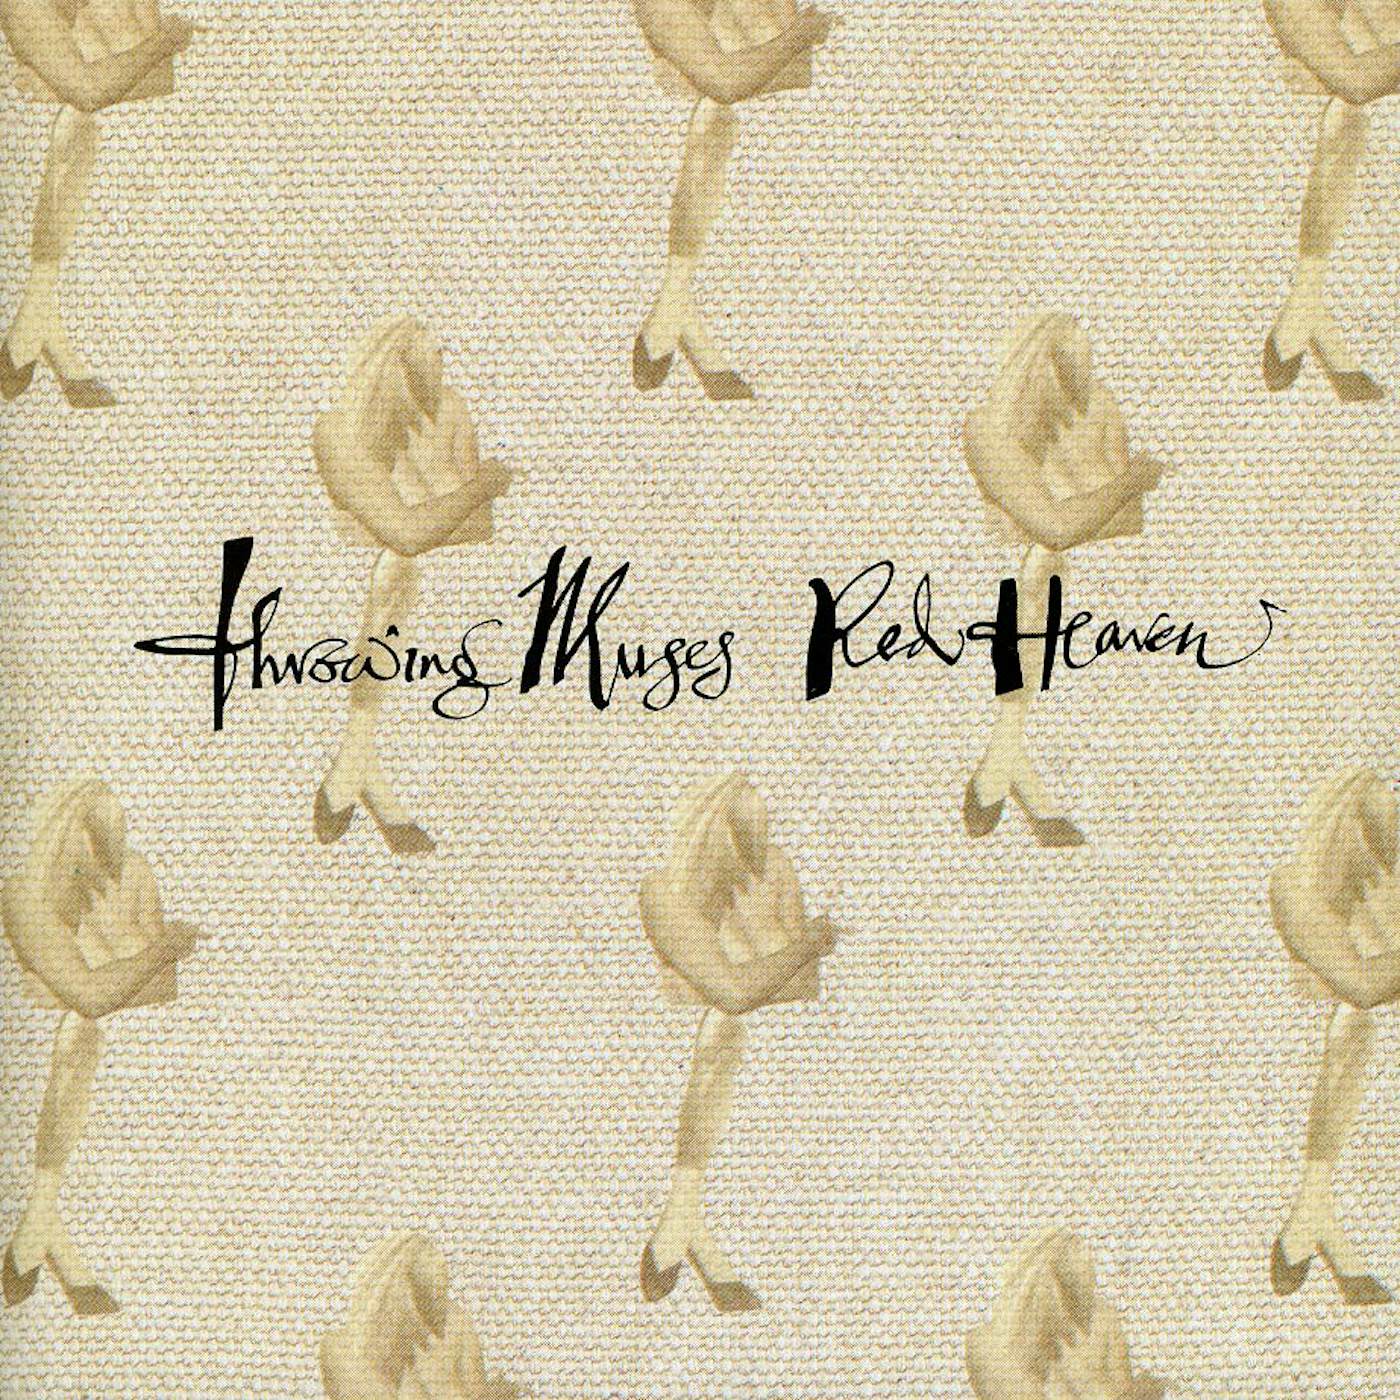 Throwing Muses RED HEAVEN CD